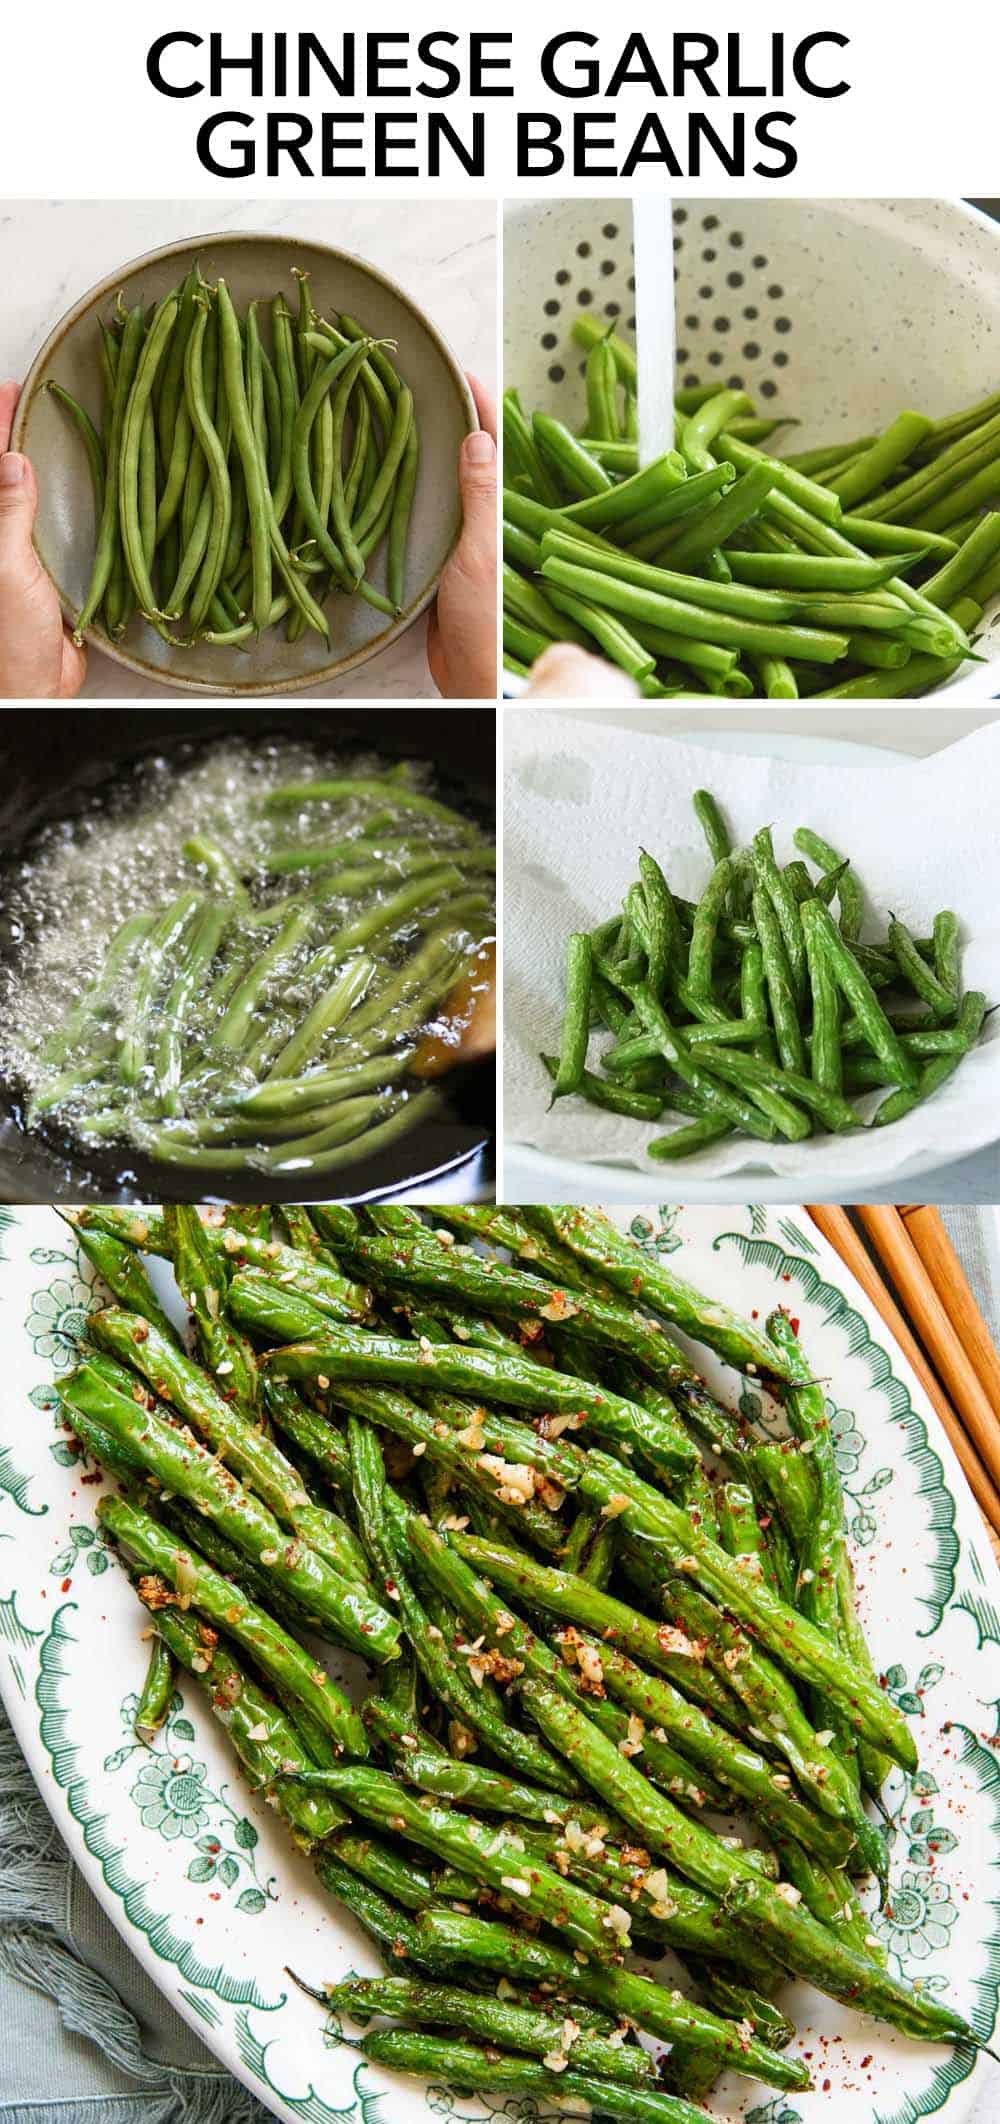 How To Make Chinese Garlic Green Beans